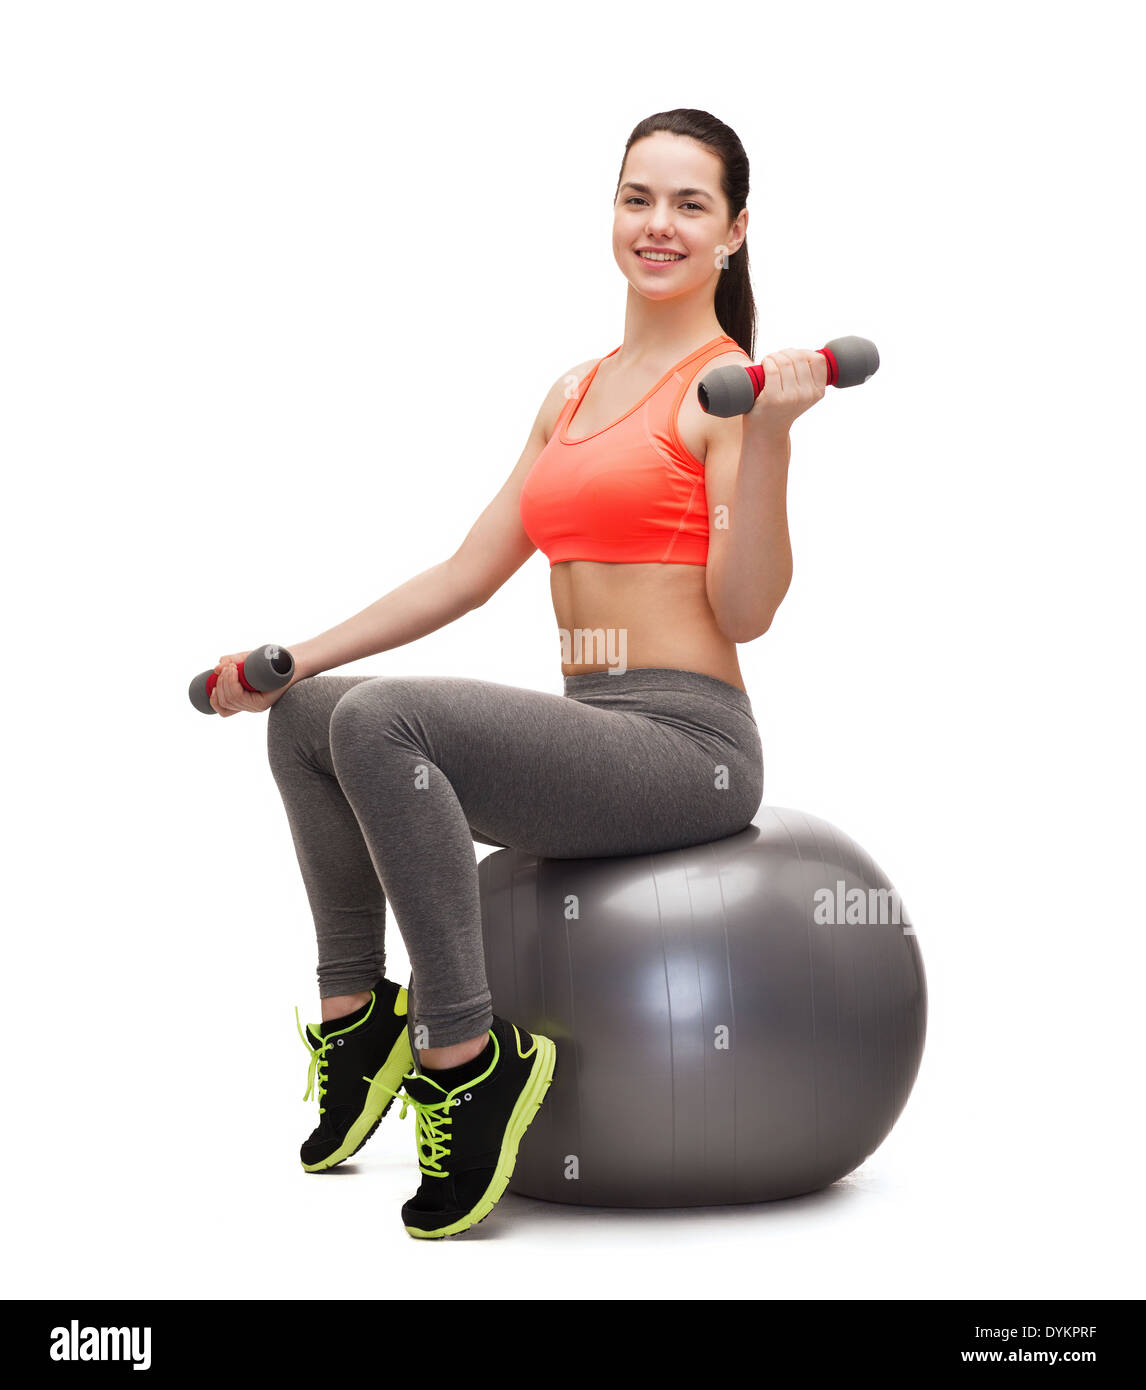 teenager with dumbbells sitting on fitness ball Stock Photo